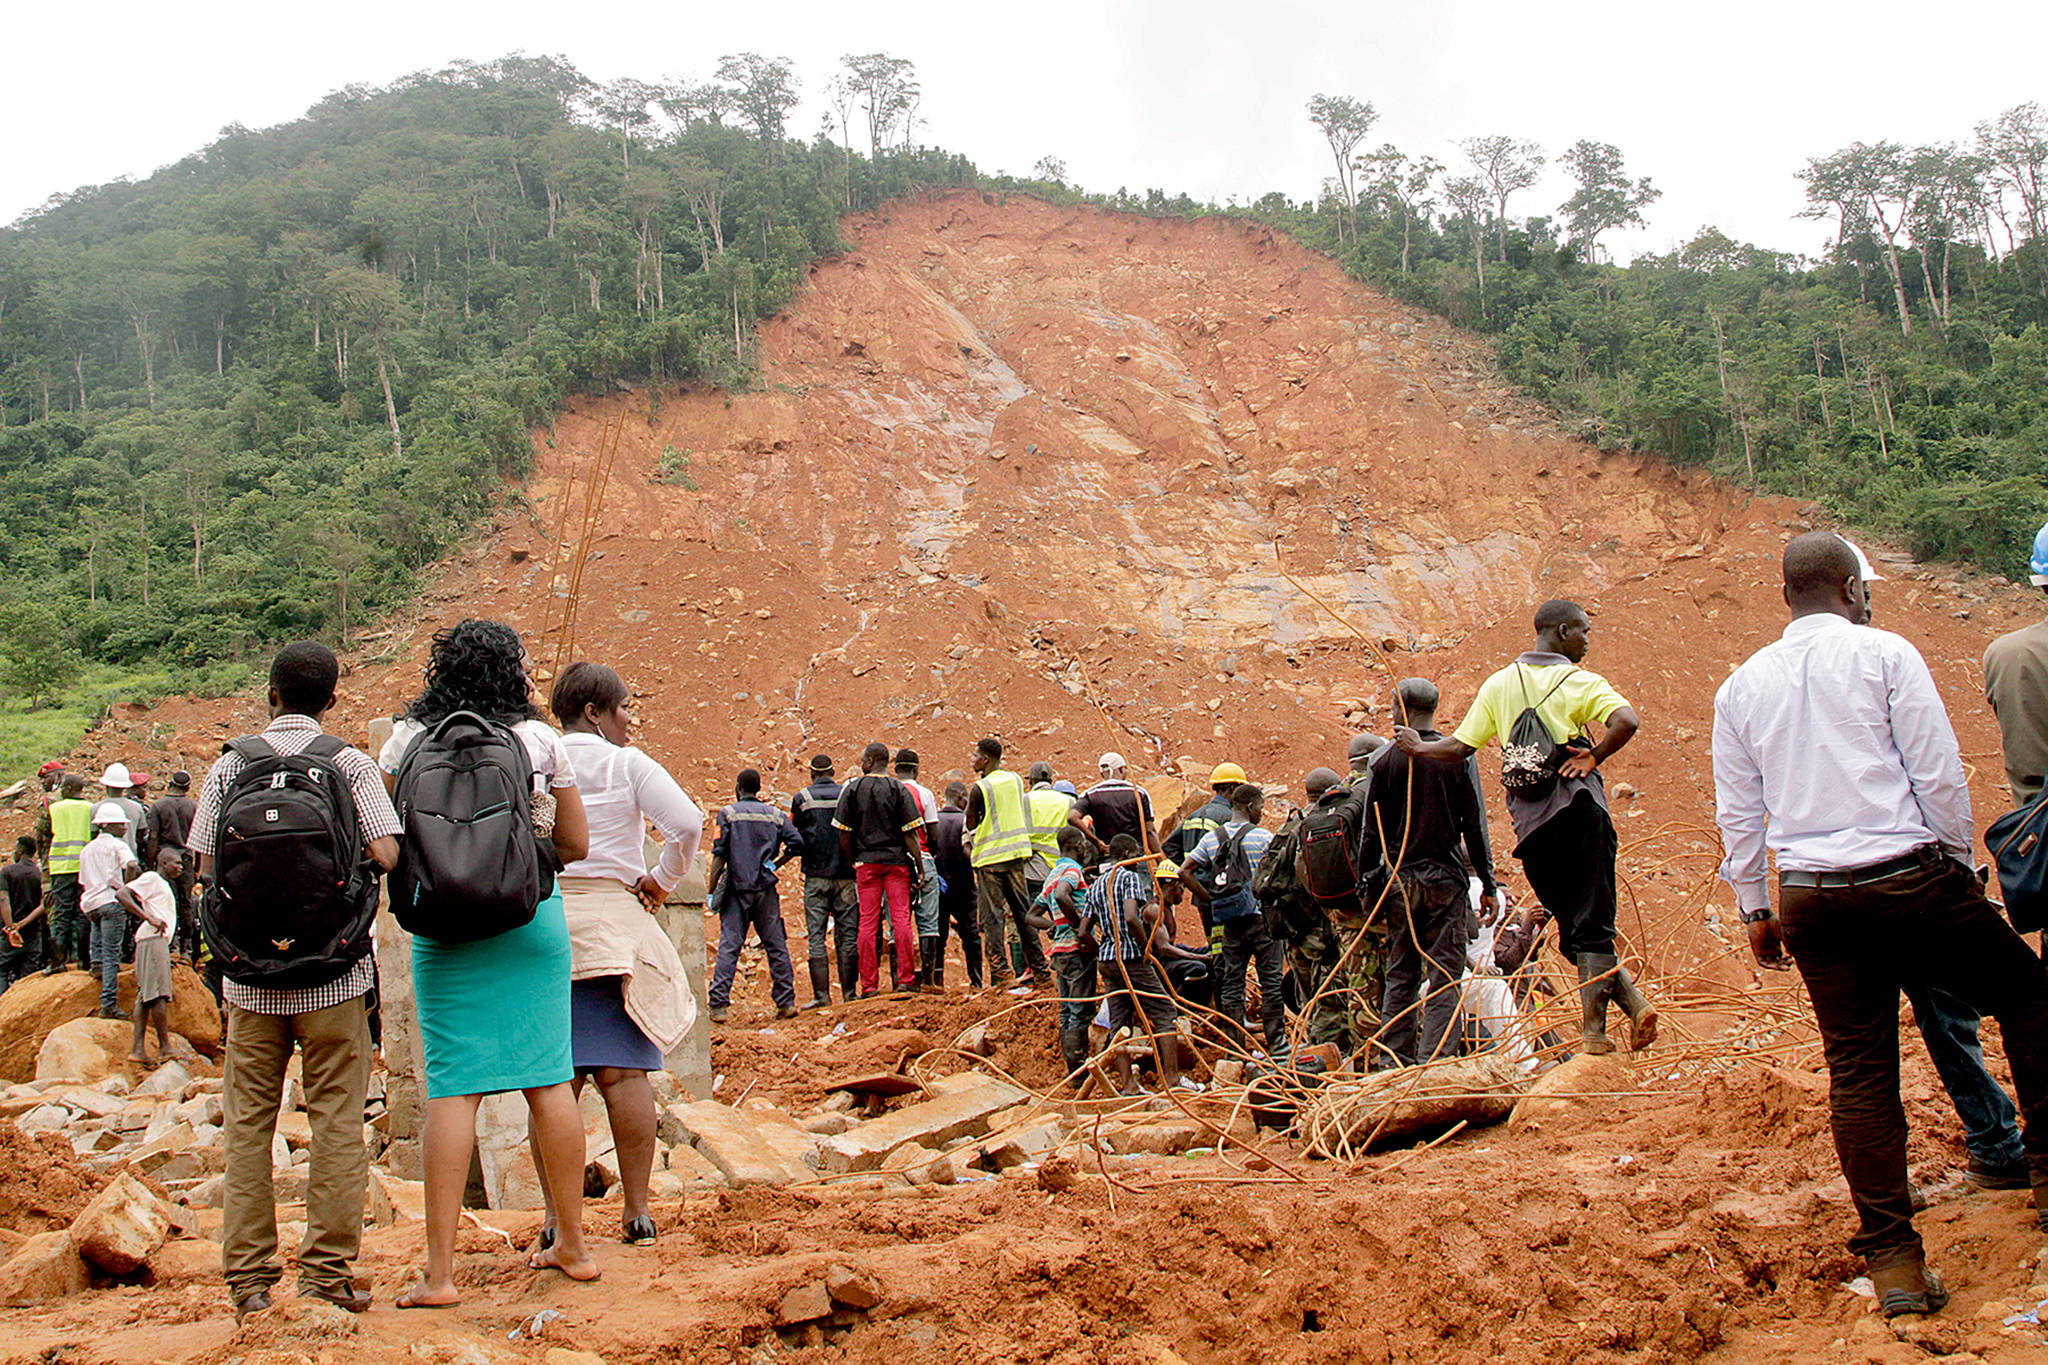 Volunteers wait at the scene of heavy flooding and mudslides in Regent, just outside of Sierra Leone’s capital of Freetown, on Tuesday. (AP Photo/ Kabba Kargbo)